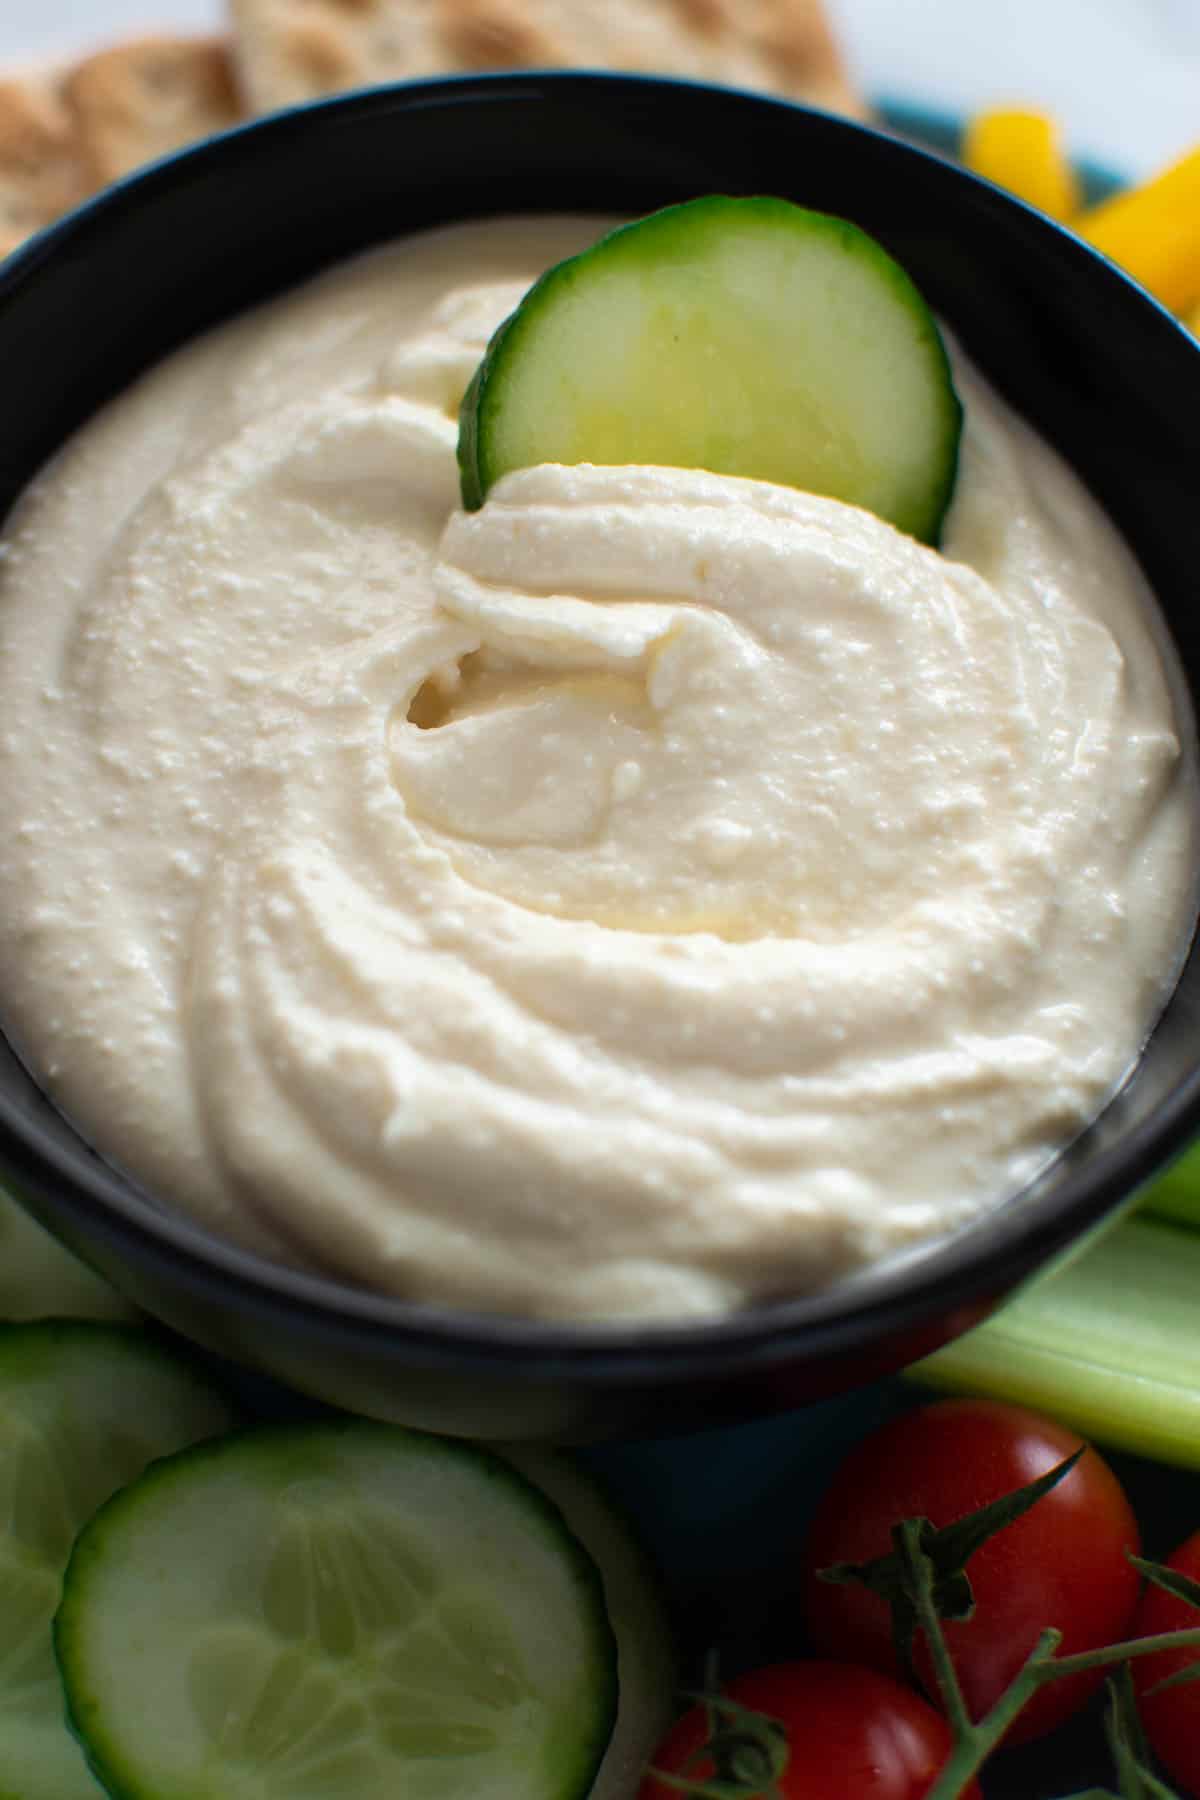 Smooth feta dip with a slice of cucumber dipped into it.